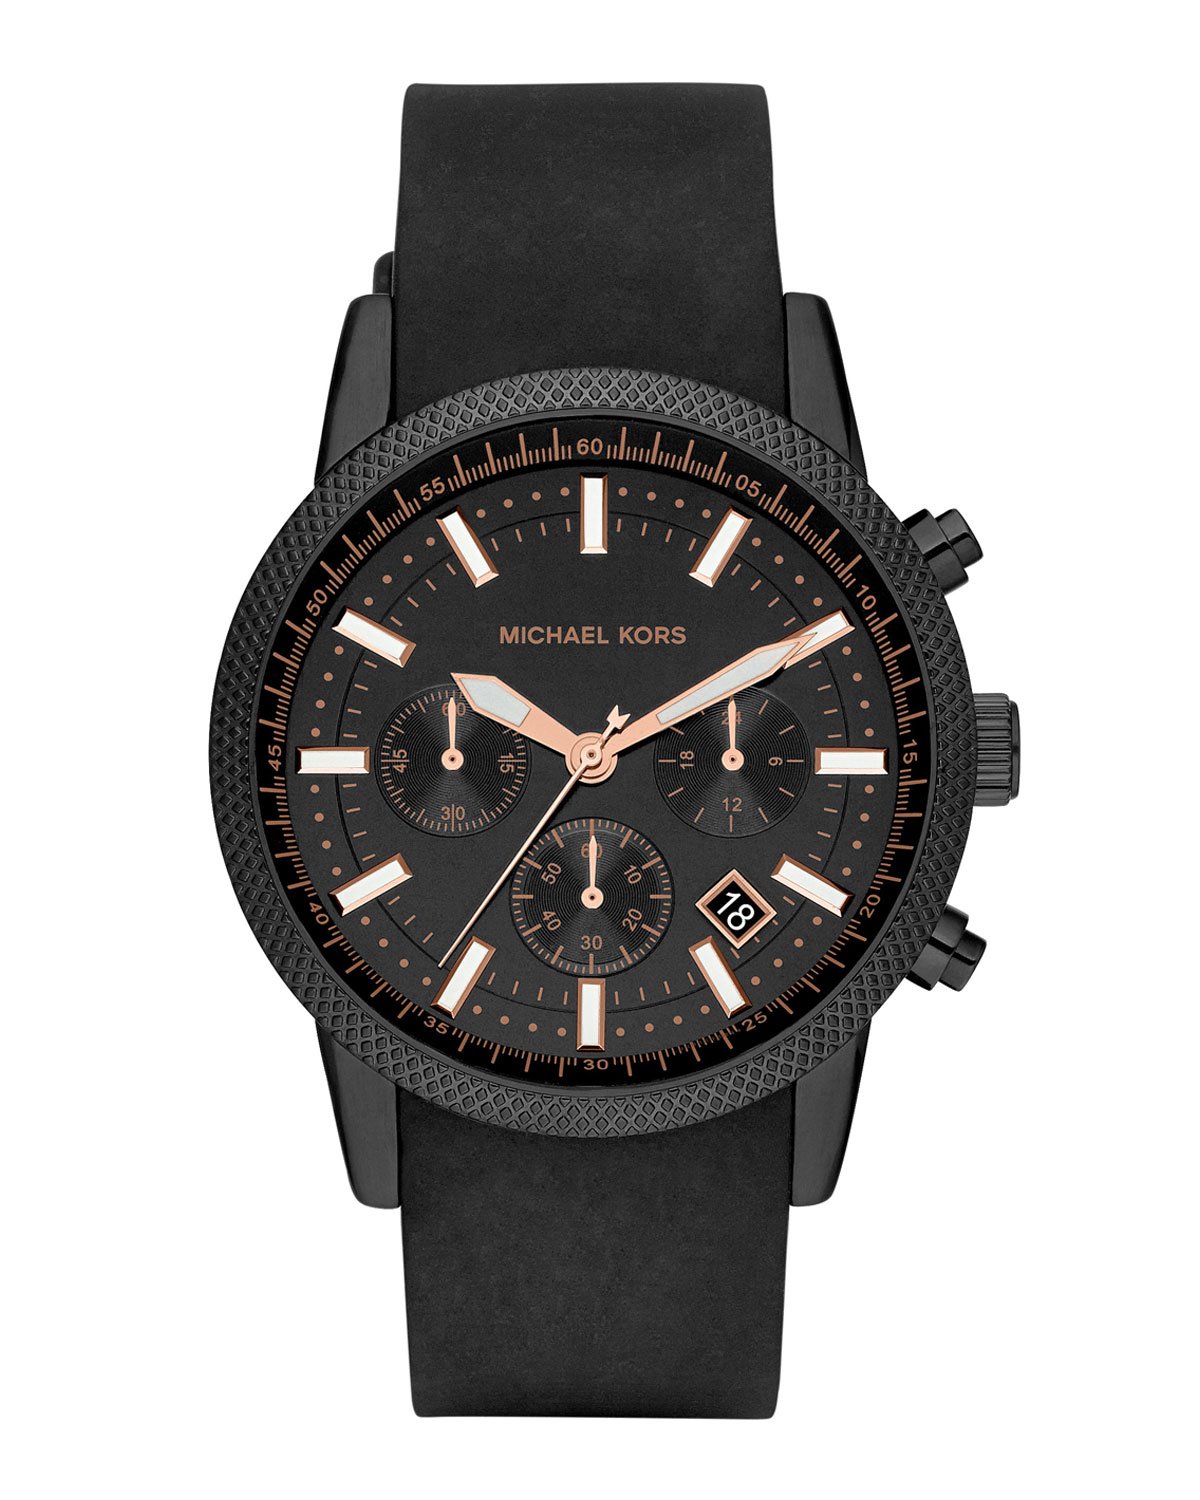 Lyst - Michael kors Mens Black Silicone Scout Chronograph Watch in ...